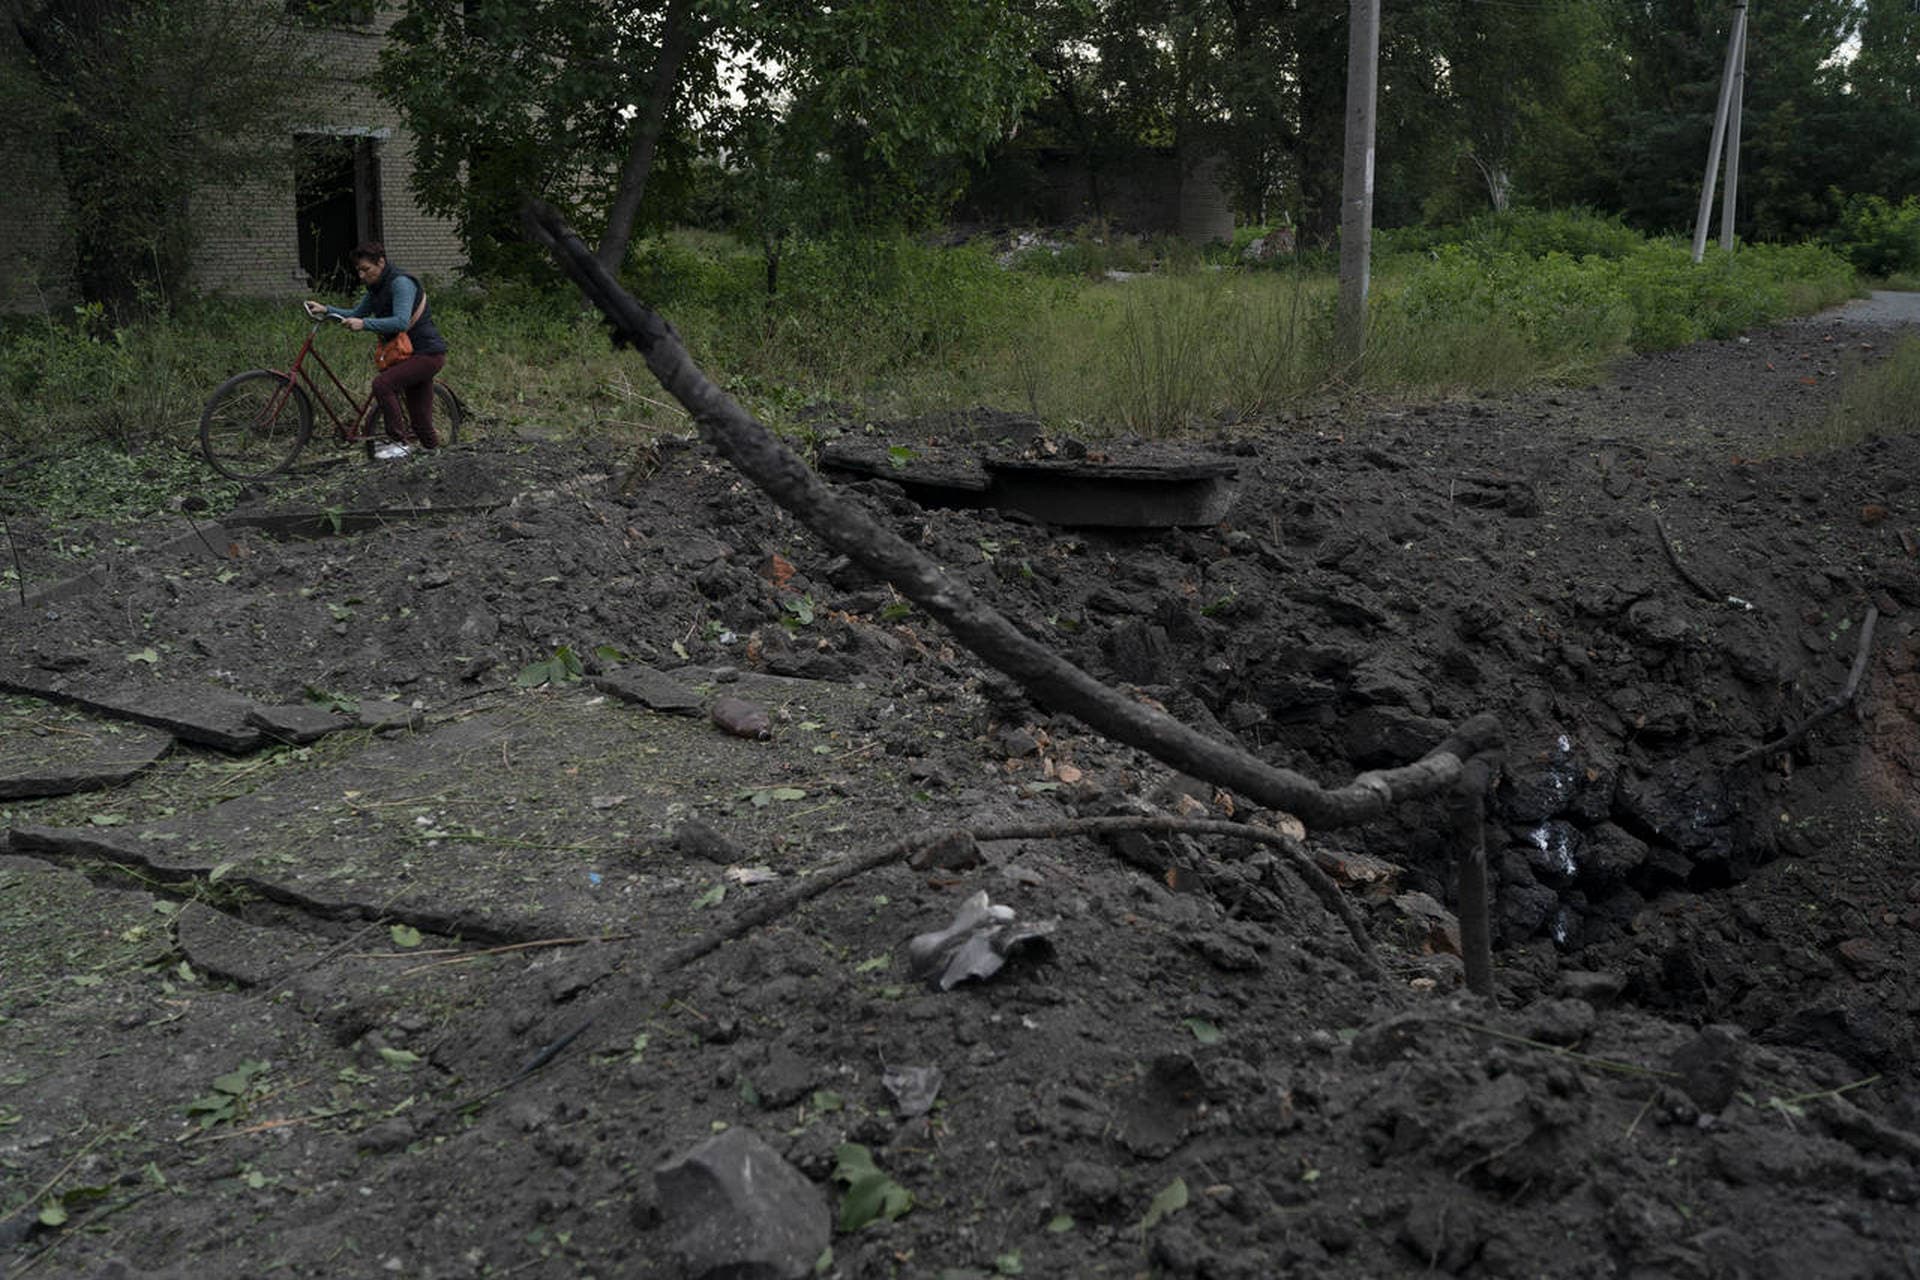 A woman walks past a crater created by an explosion after a Russian attack in Pokrovsk region